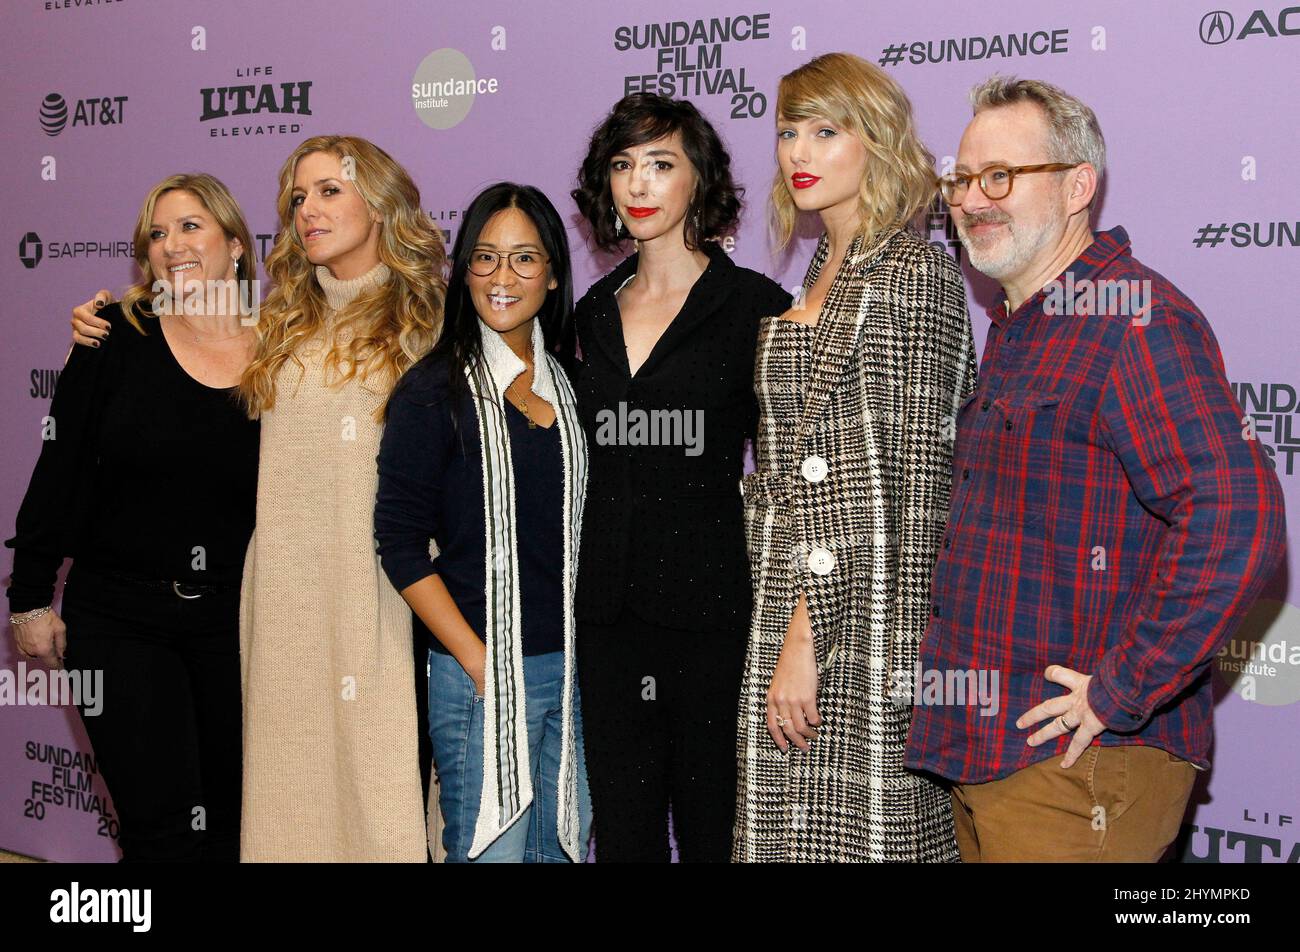 Christine O'Malley, Caitrin Rogers, Guest, Lana Wilson, Taylor Swift, Morgan Neville at the premiere of 'Miss Americana' during the 2020 Sundance Film Festival held at the Eccles Theatre on January 23, 2020 in Park City Stock Photo